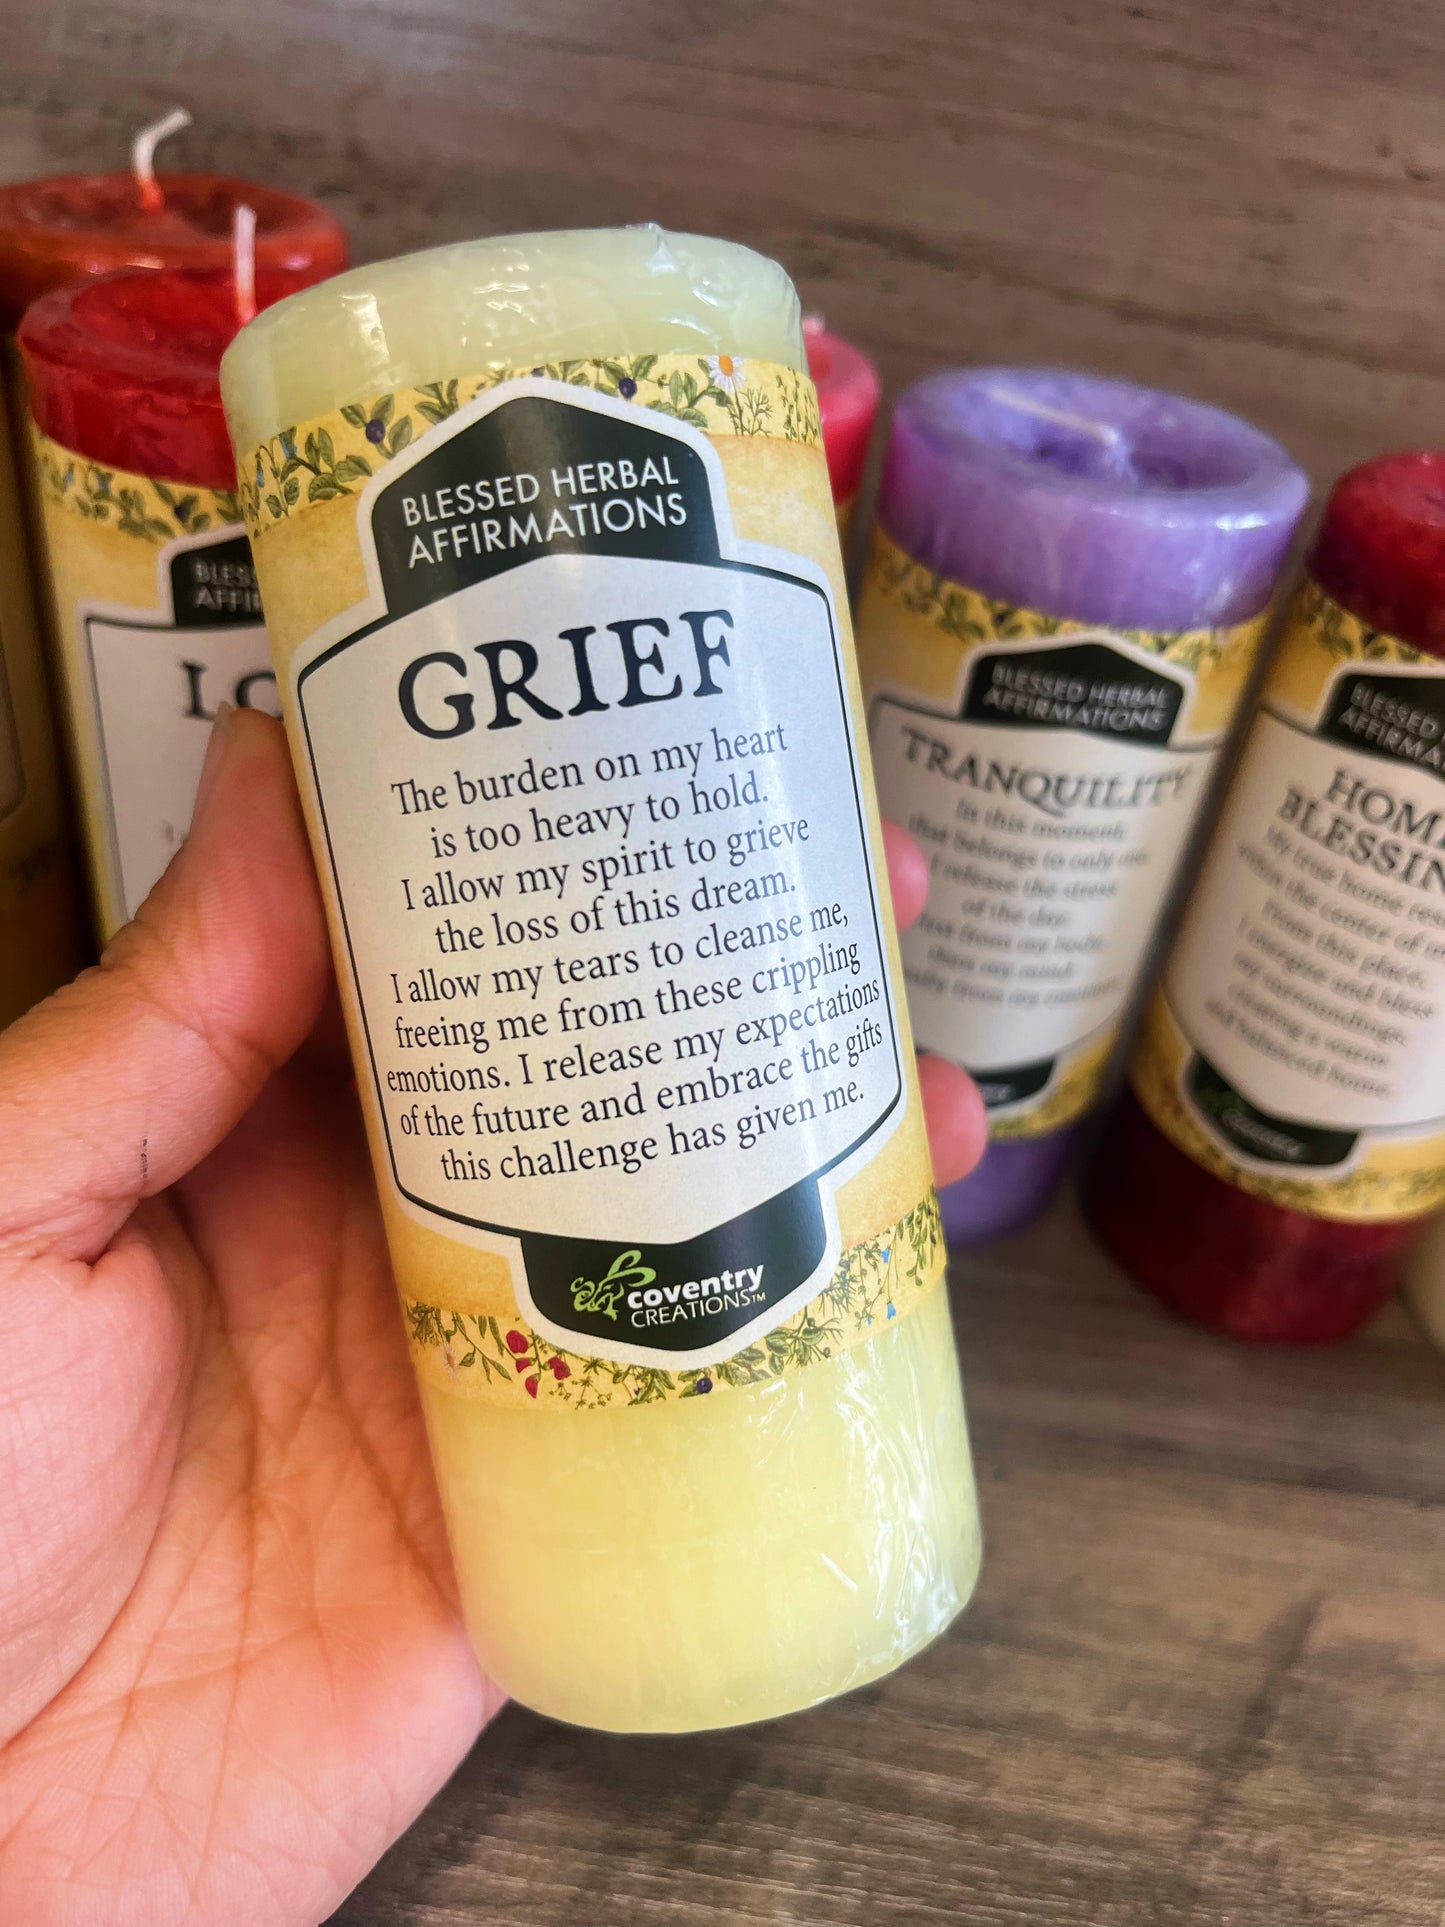 Herbal Affirmation Candles 4”